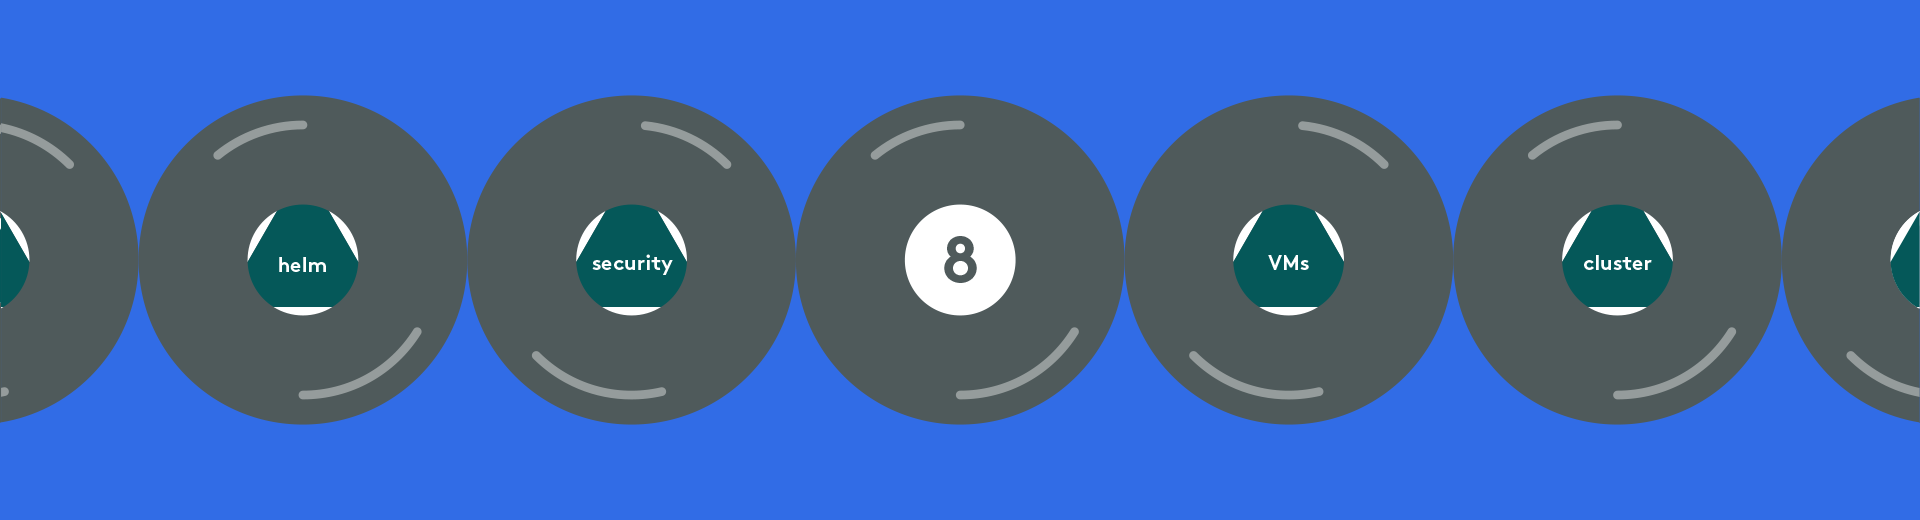 A series of magic 8 balls with Kubernetes terms on them